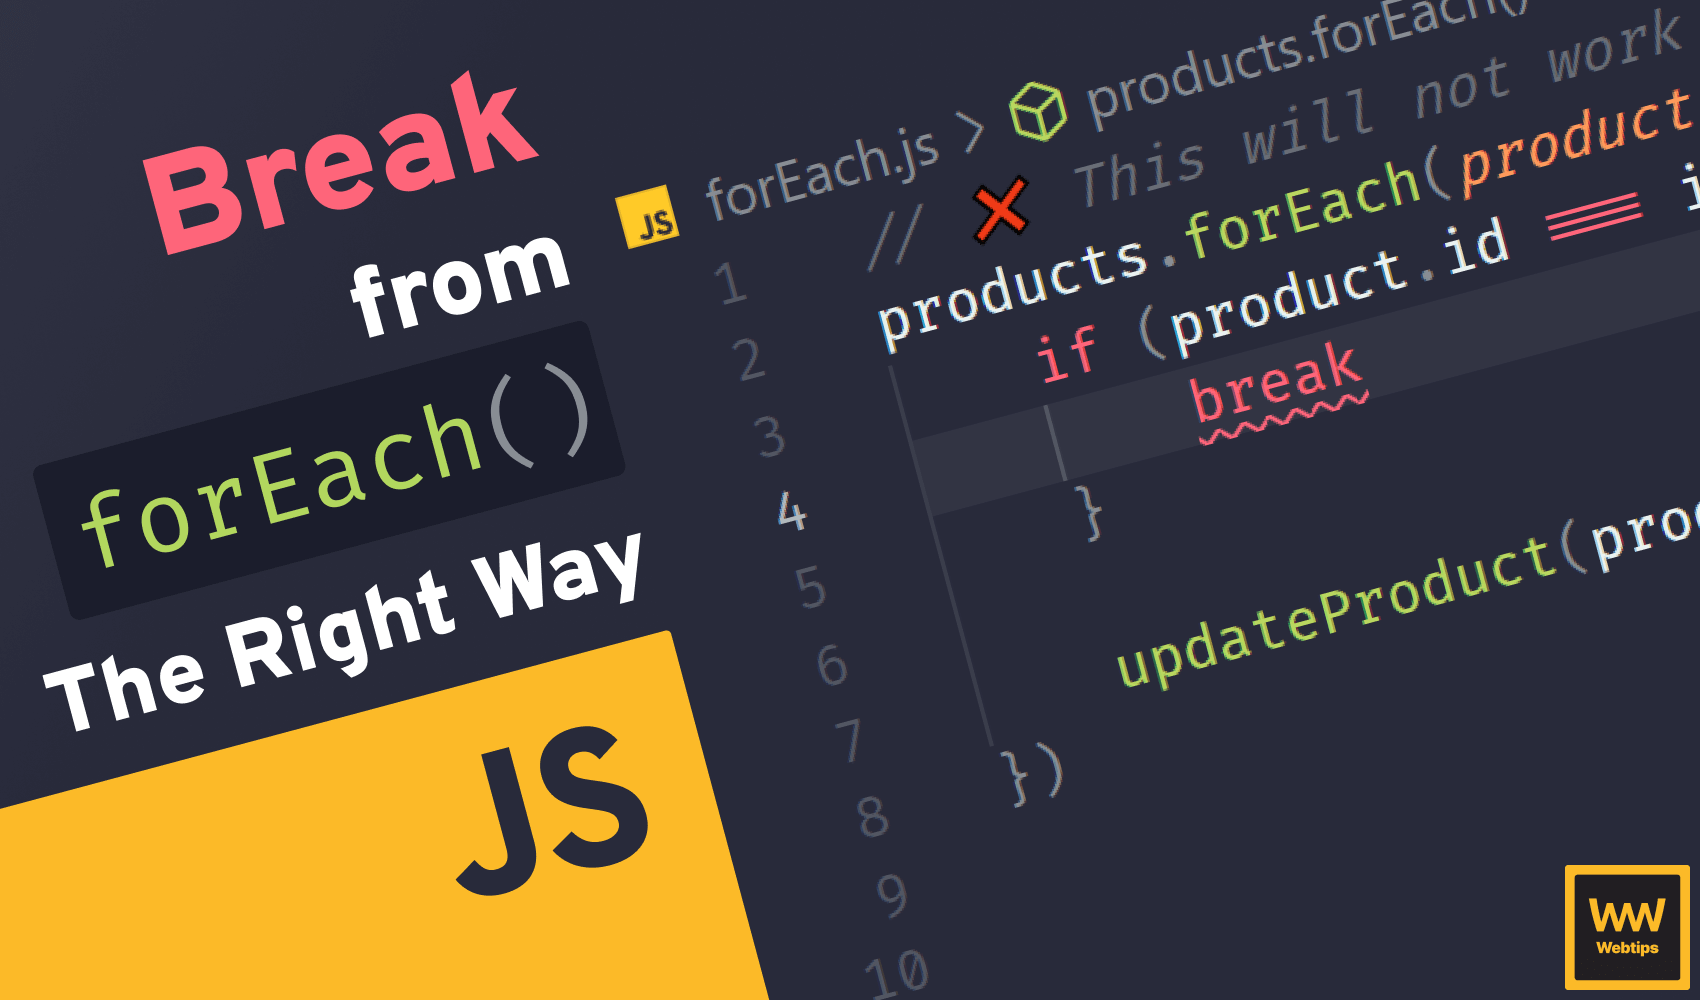 The Right Way to Break from forEach in JavaScript